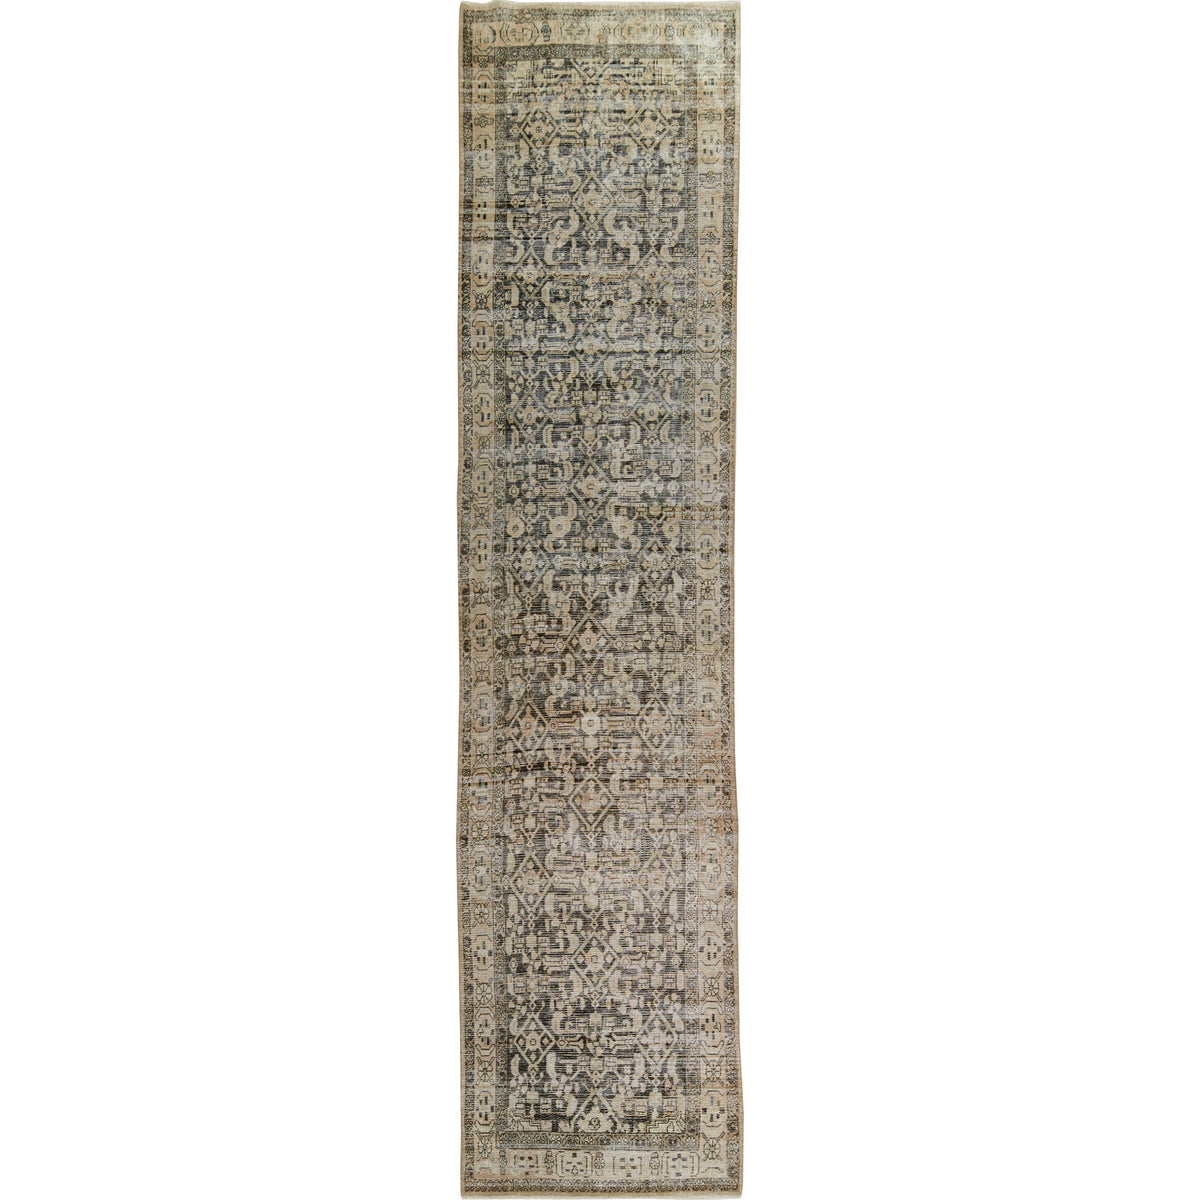 Sabra - The Brown Tapestry of Persian Legacy | Kuden Rugs